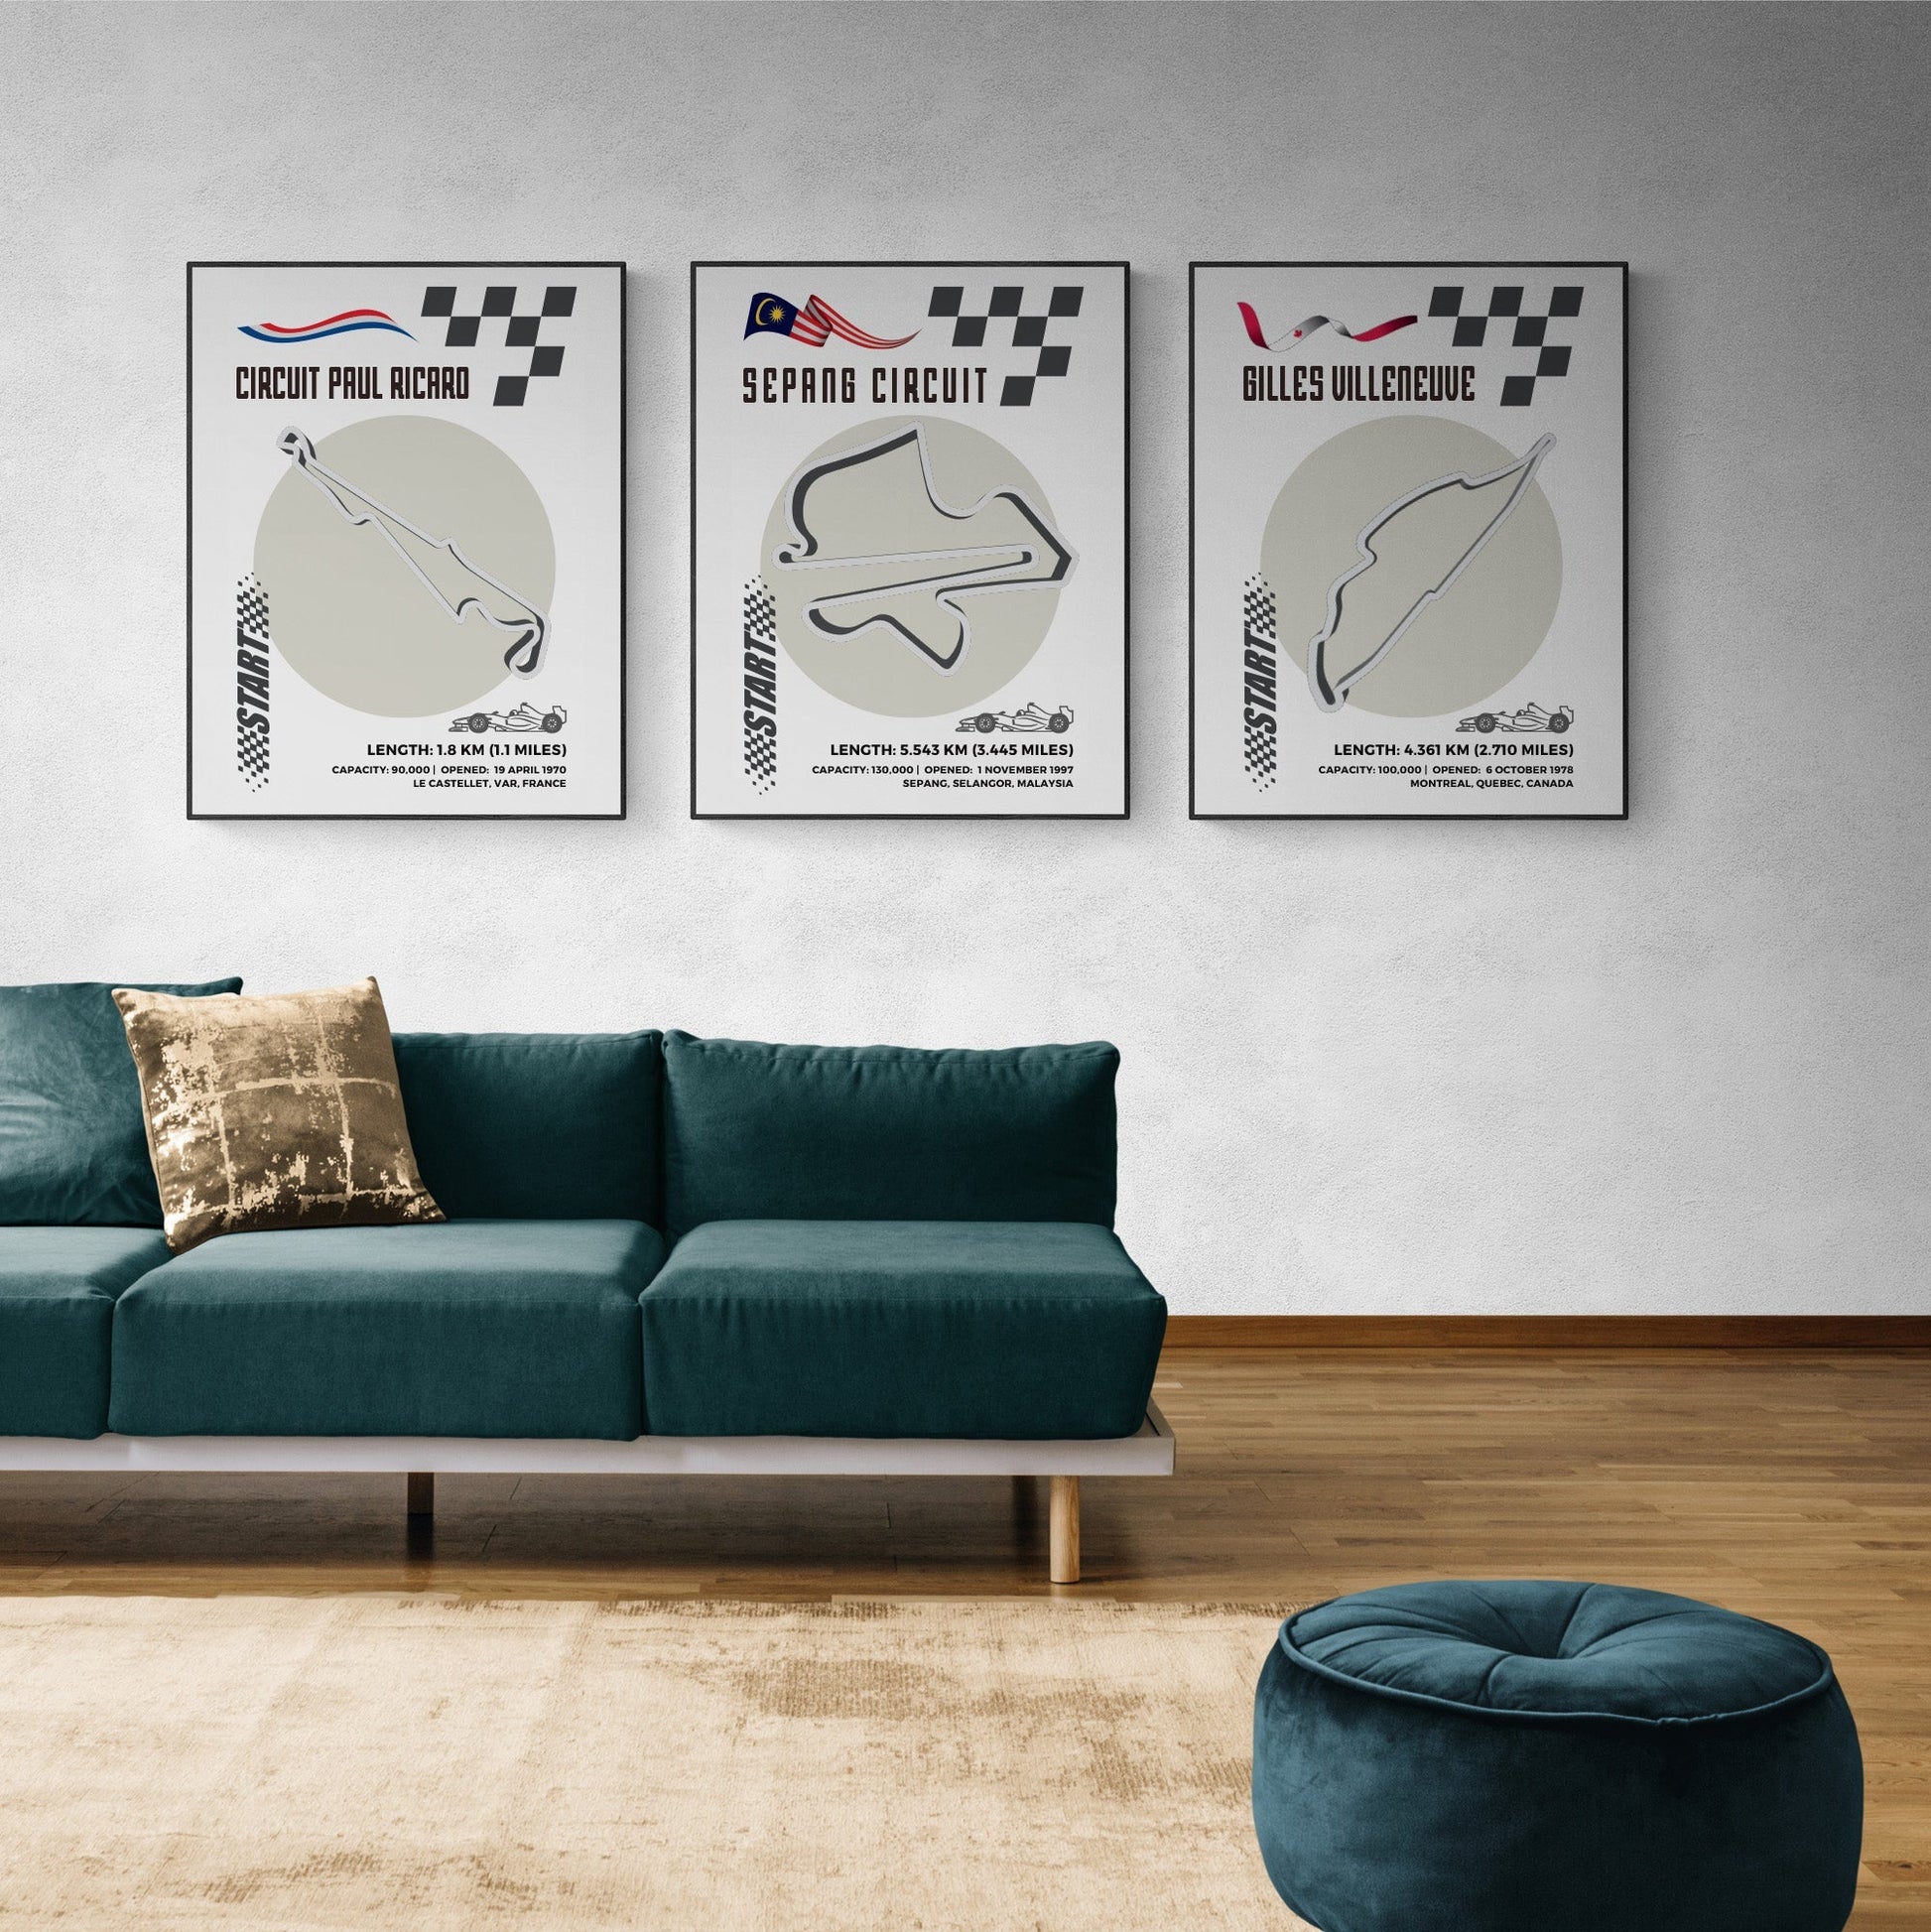 Create a dream wall for formula one enthusiasts with Circuit Paul Ricard F1 Posters. Featuring a detailed map of F1 racing tracks, each poster on matte premium paper showcases the circuit's history, construction year, country, and memorable moments. Add a "Formula One Poster" to complete the look. Made in the UK, these posters are age-resistant.